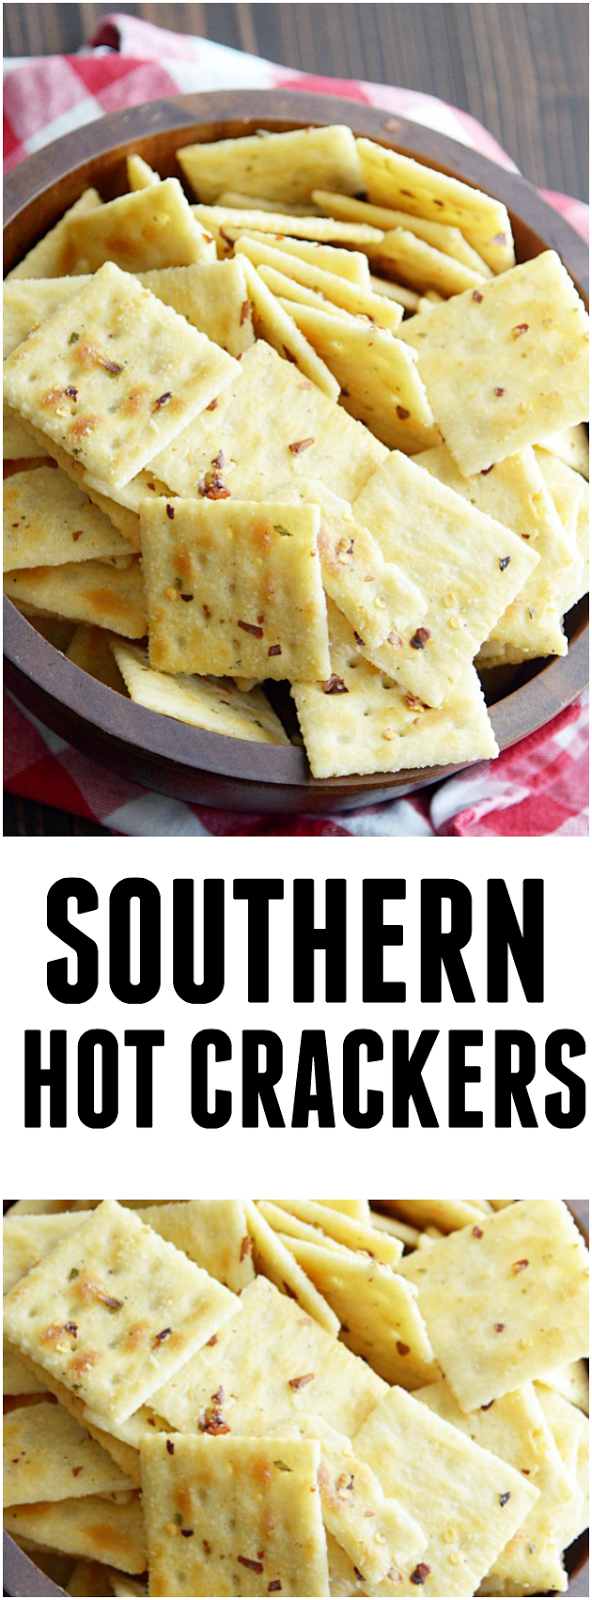 This addictive snack is a simple Southern favorite!